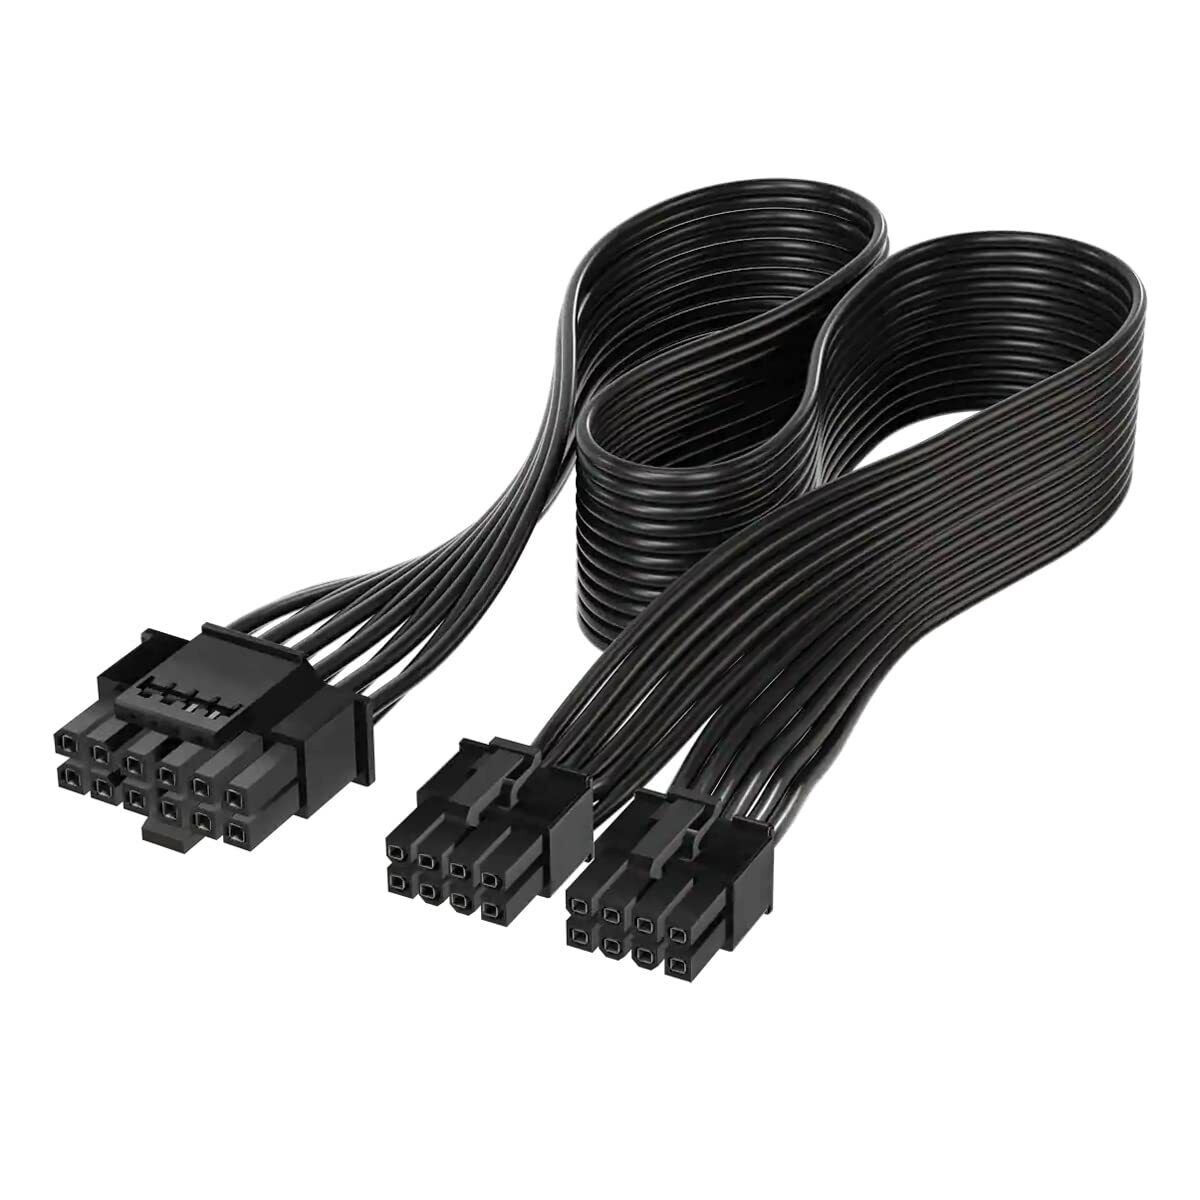 CY ATX3.0 PCIe 5.0 12VHPWR Power Modular Cable to Dual ATX 8Pin for 3080 3090...